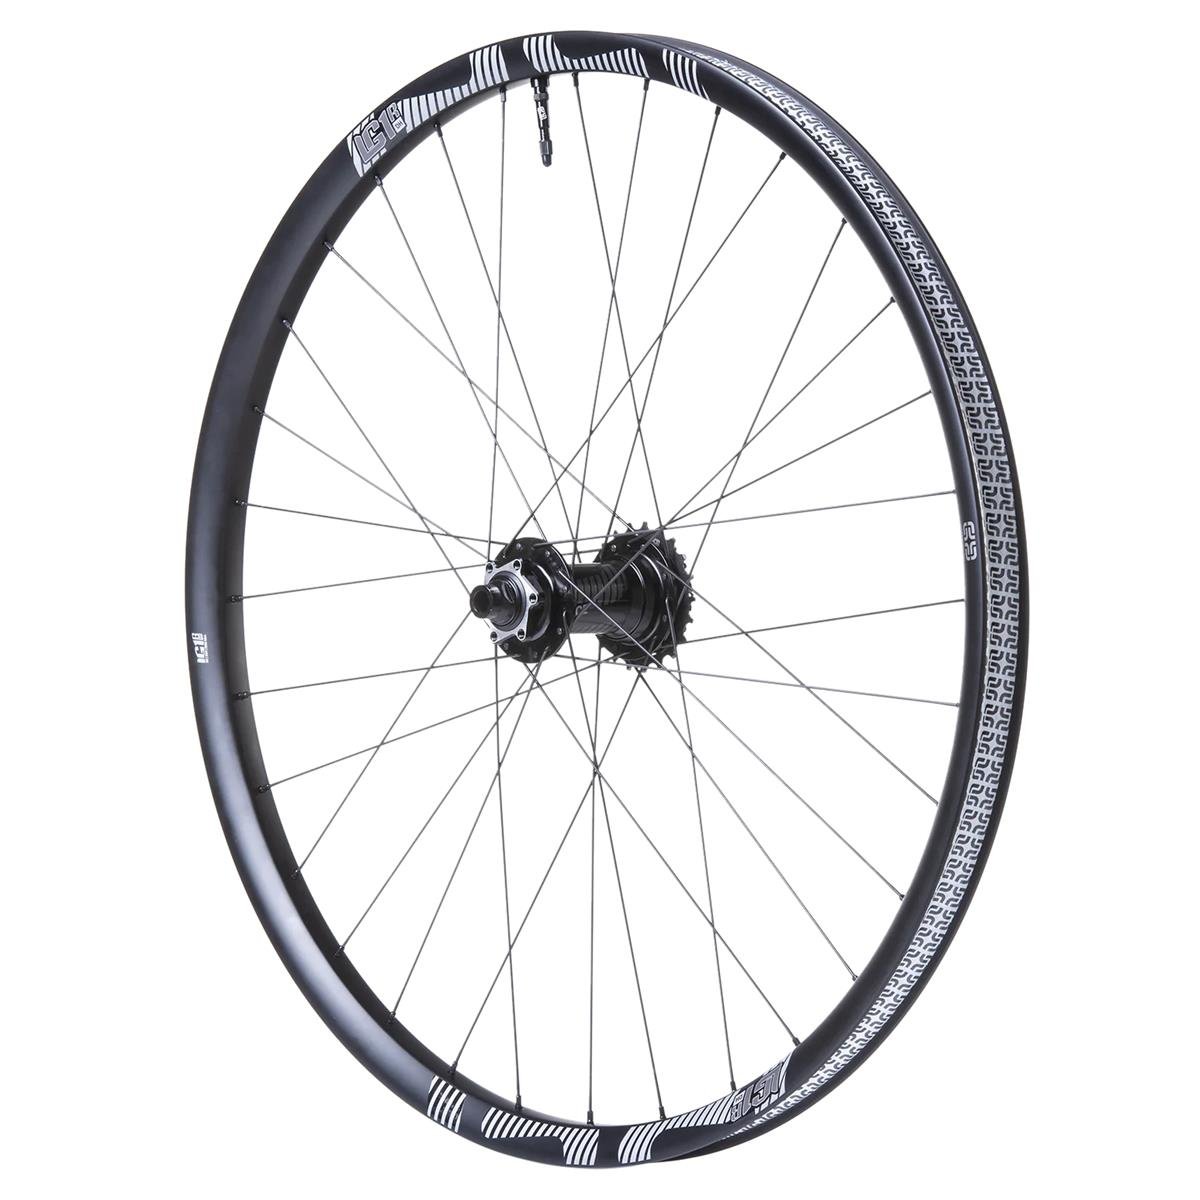 E*thirteen Wheel LG1 DH Race Carbon Front, 27.5 Inches, 110x20 mm, Boost, 30 mm, Black